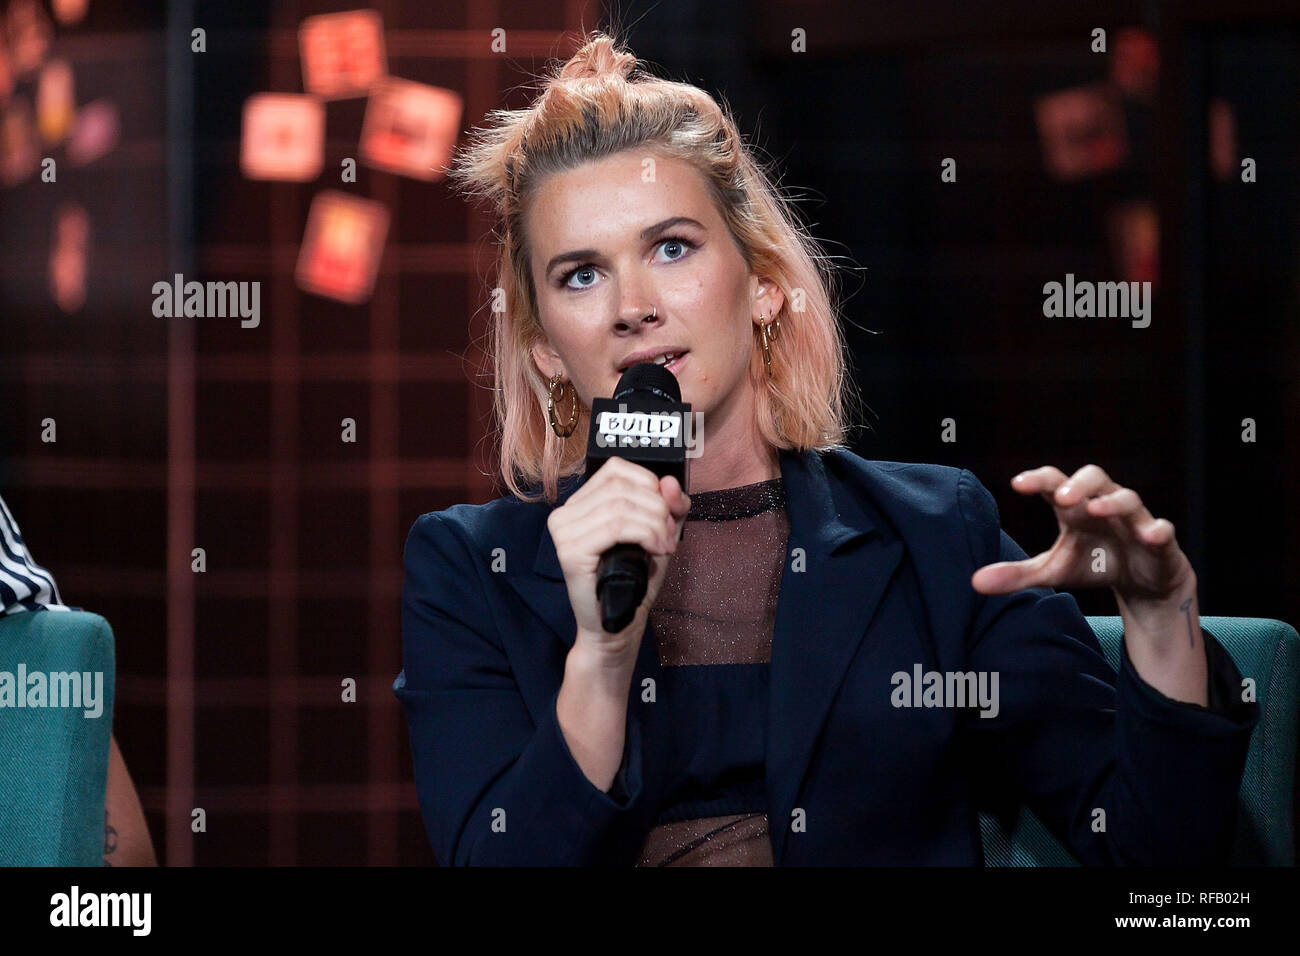 New York, USA. 24 Jan, 2019. Georgia Nott at The Thursday, Jan 24, 2019 BUILD Series Inside Candids of the band Broods discussing the new album 'Concious' at BUILD Studio in New York, USA. Credit: Steve Mack/S.D. Mack Pictures/Alamy Live News Stock Photo